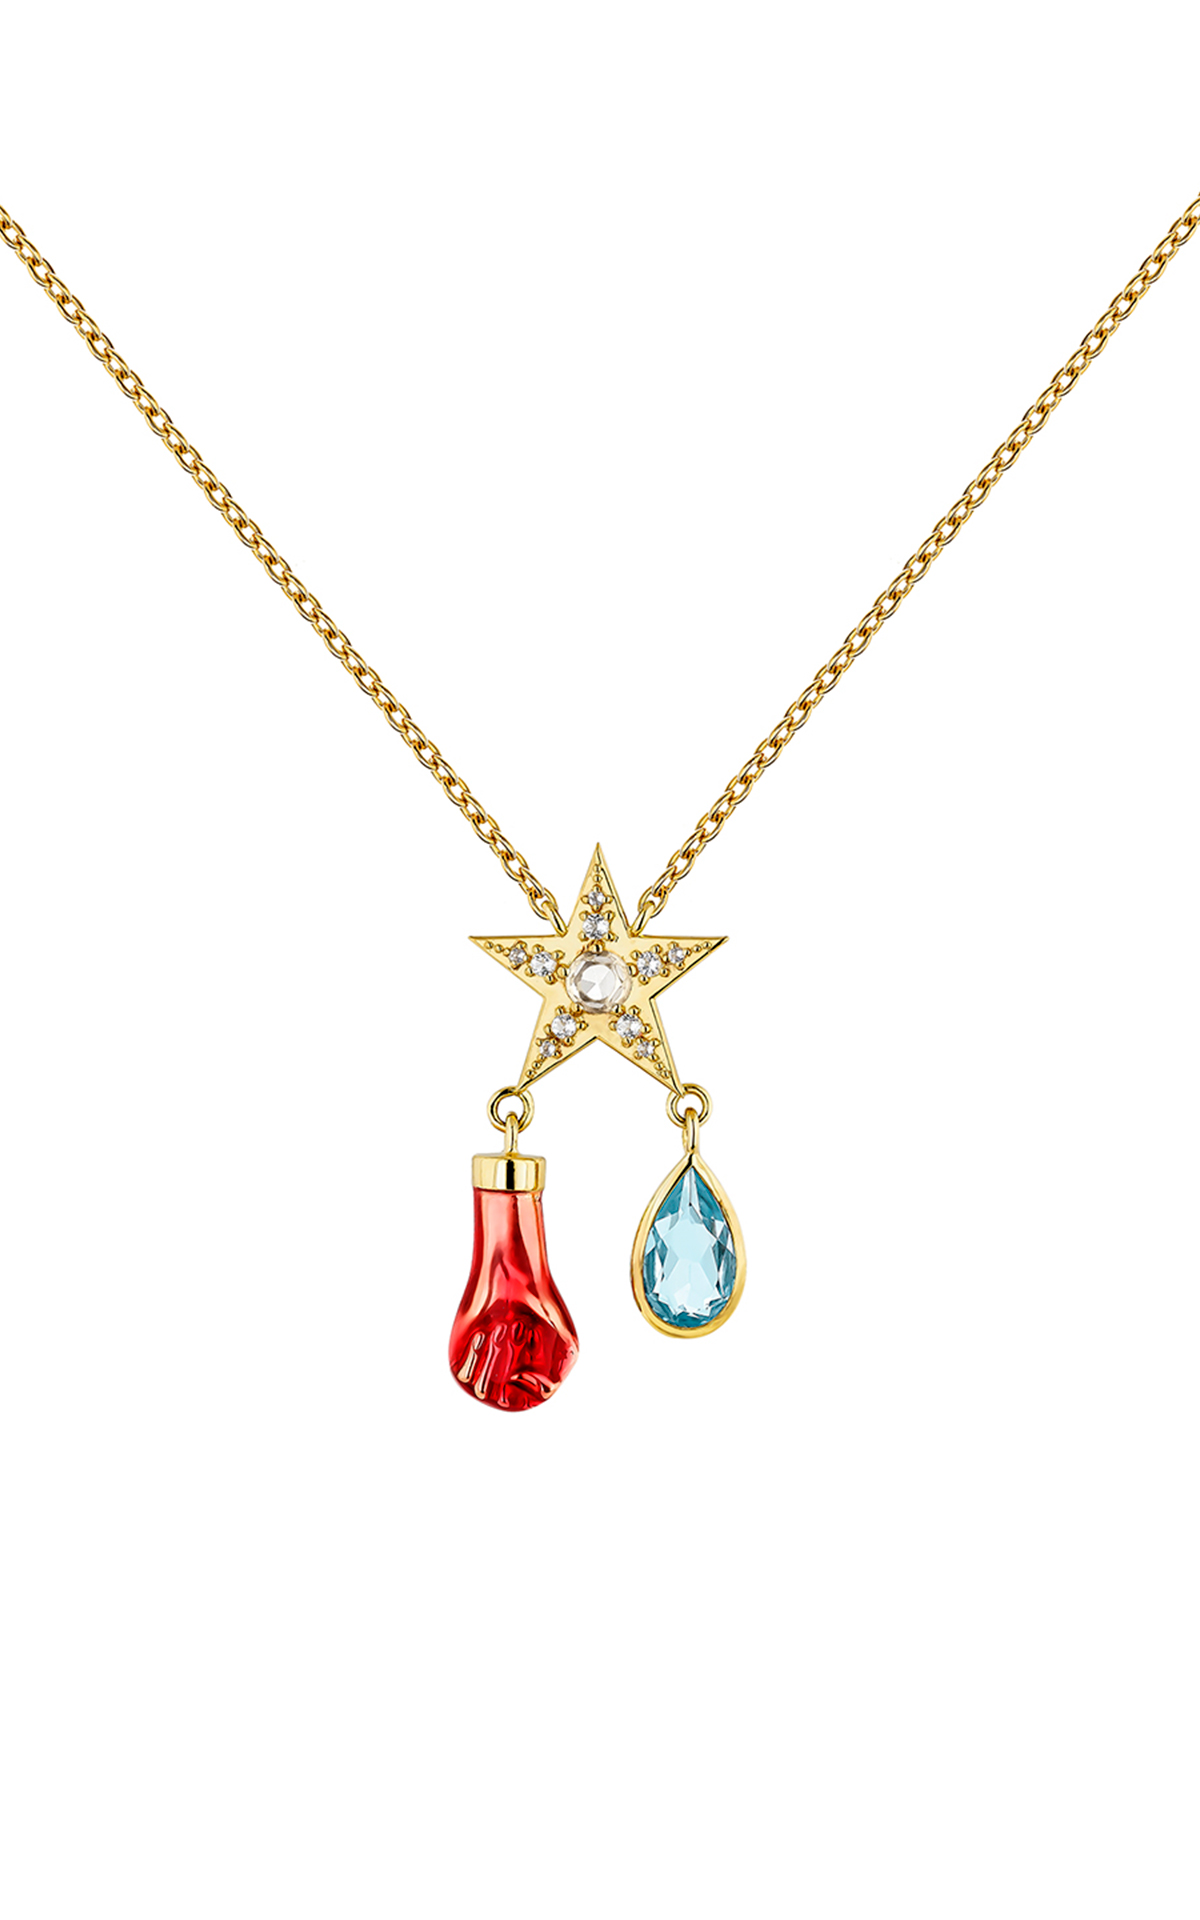 Necklace with a star Aristocrazy